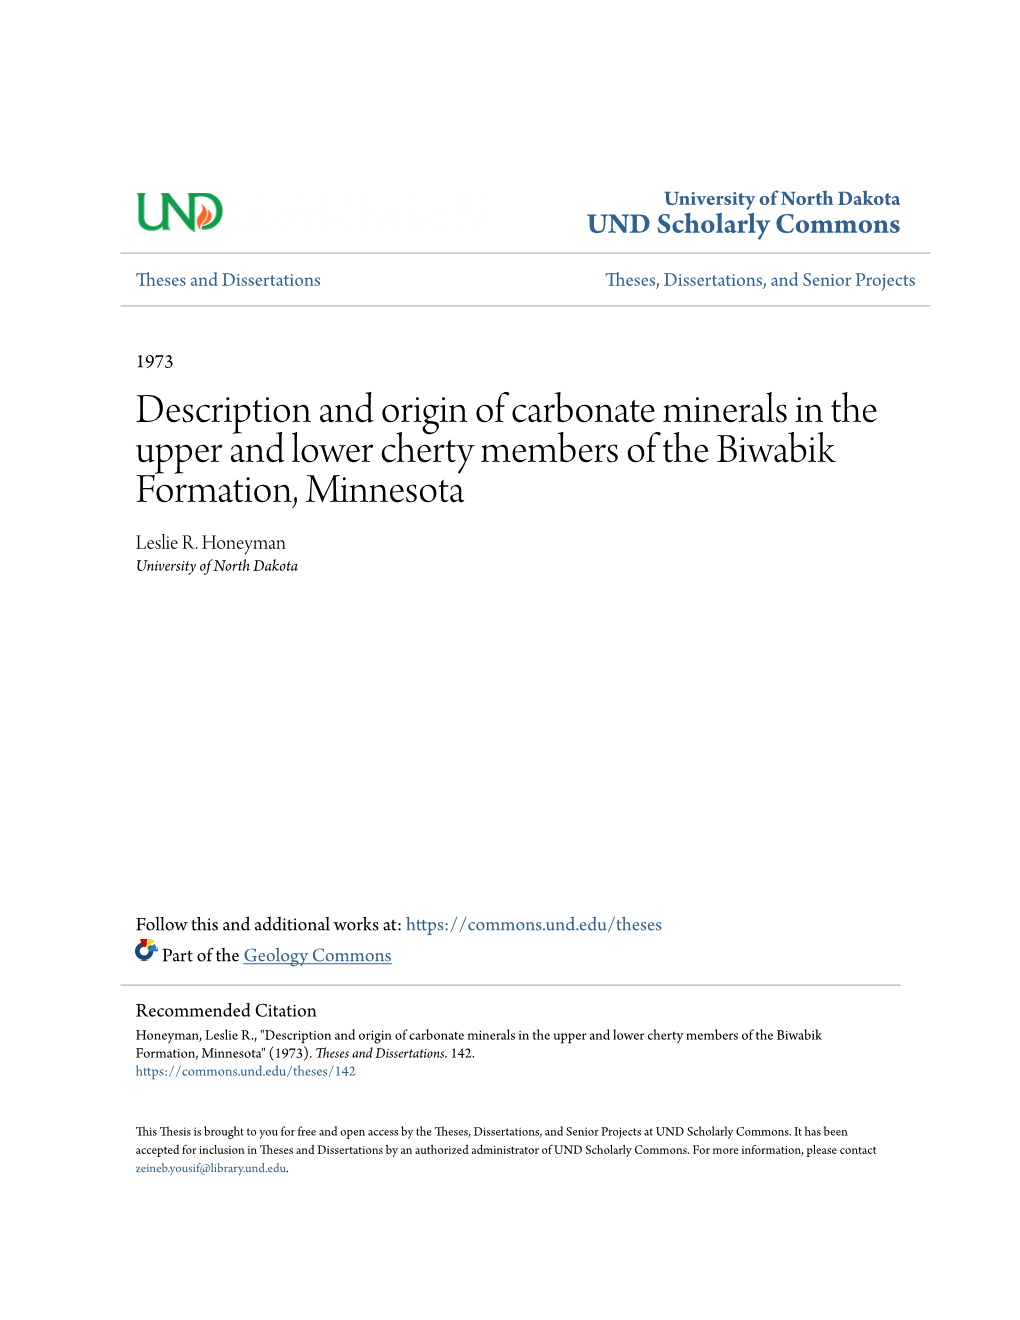 Description and Origin of Carbonate Minerals in the Upper and Lower Cherty Members of the Biwabik Formation, Minnesota Leslie R